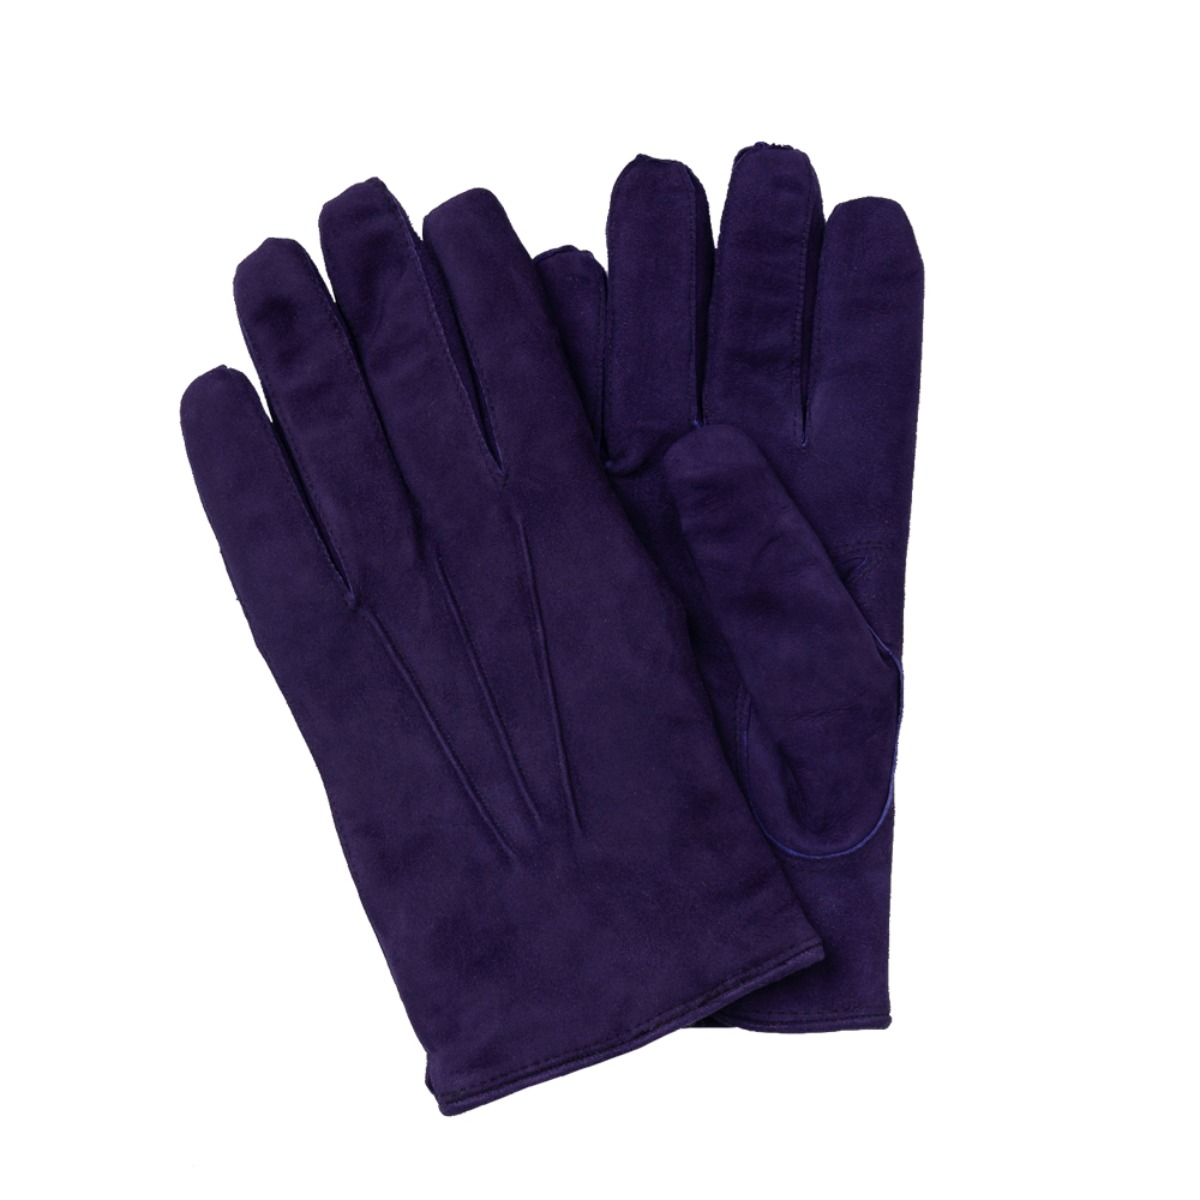 OMEGA GLOVES SUEDE NAPPA LEATHER GLOVES PURPLE